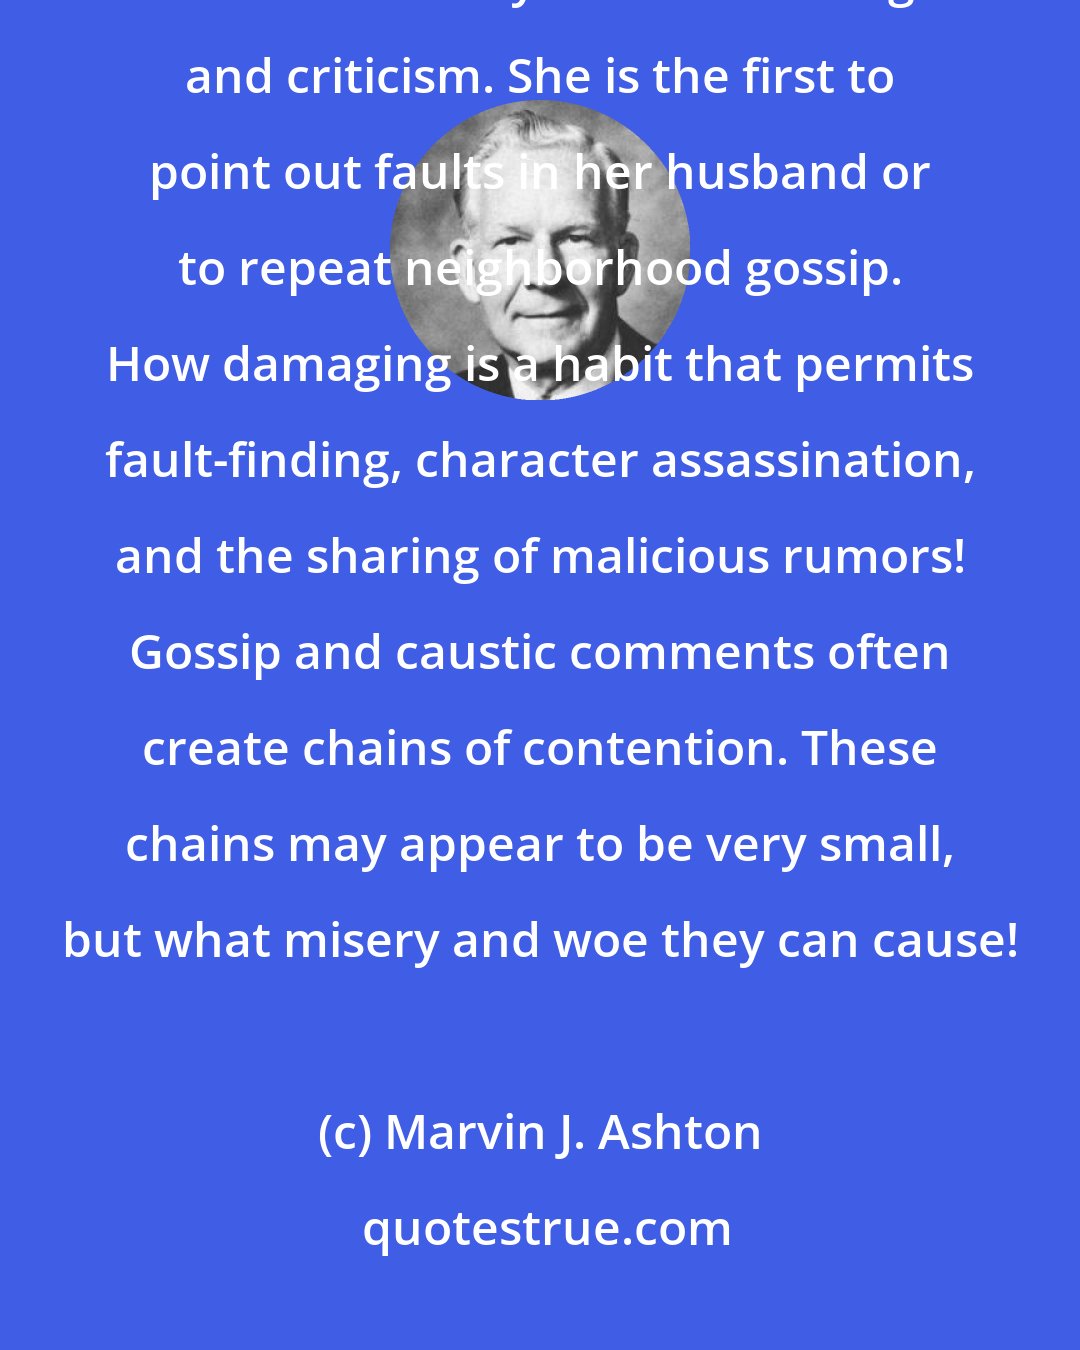 Marvin J. Ashton: I am acquainted with a wife and mother who is chained securely at the present time to a life-style of murmuring and criticism. She is the first to point out faults in her husband or to repeat neighborhood gossip. How damaging is a habit that permits fault-finding, character assassination, and the sharing of malicious rumors! Gossip and caustic comments often create chains of contention. These chains may appear to be very small, but what misery and woe they can cause!